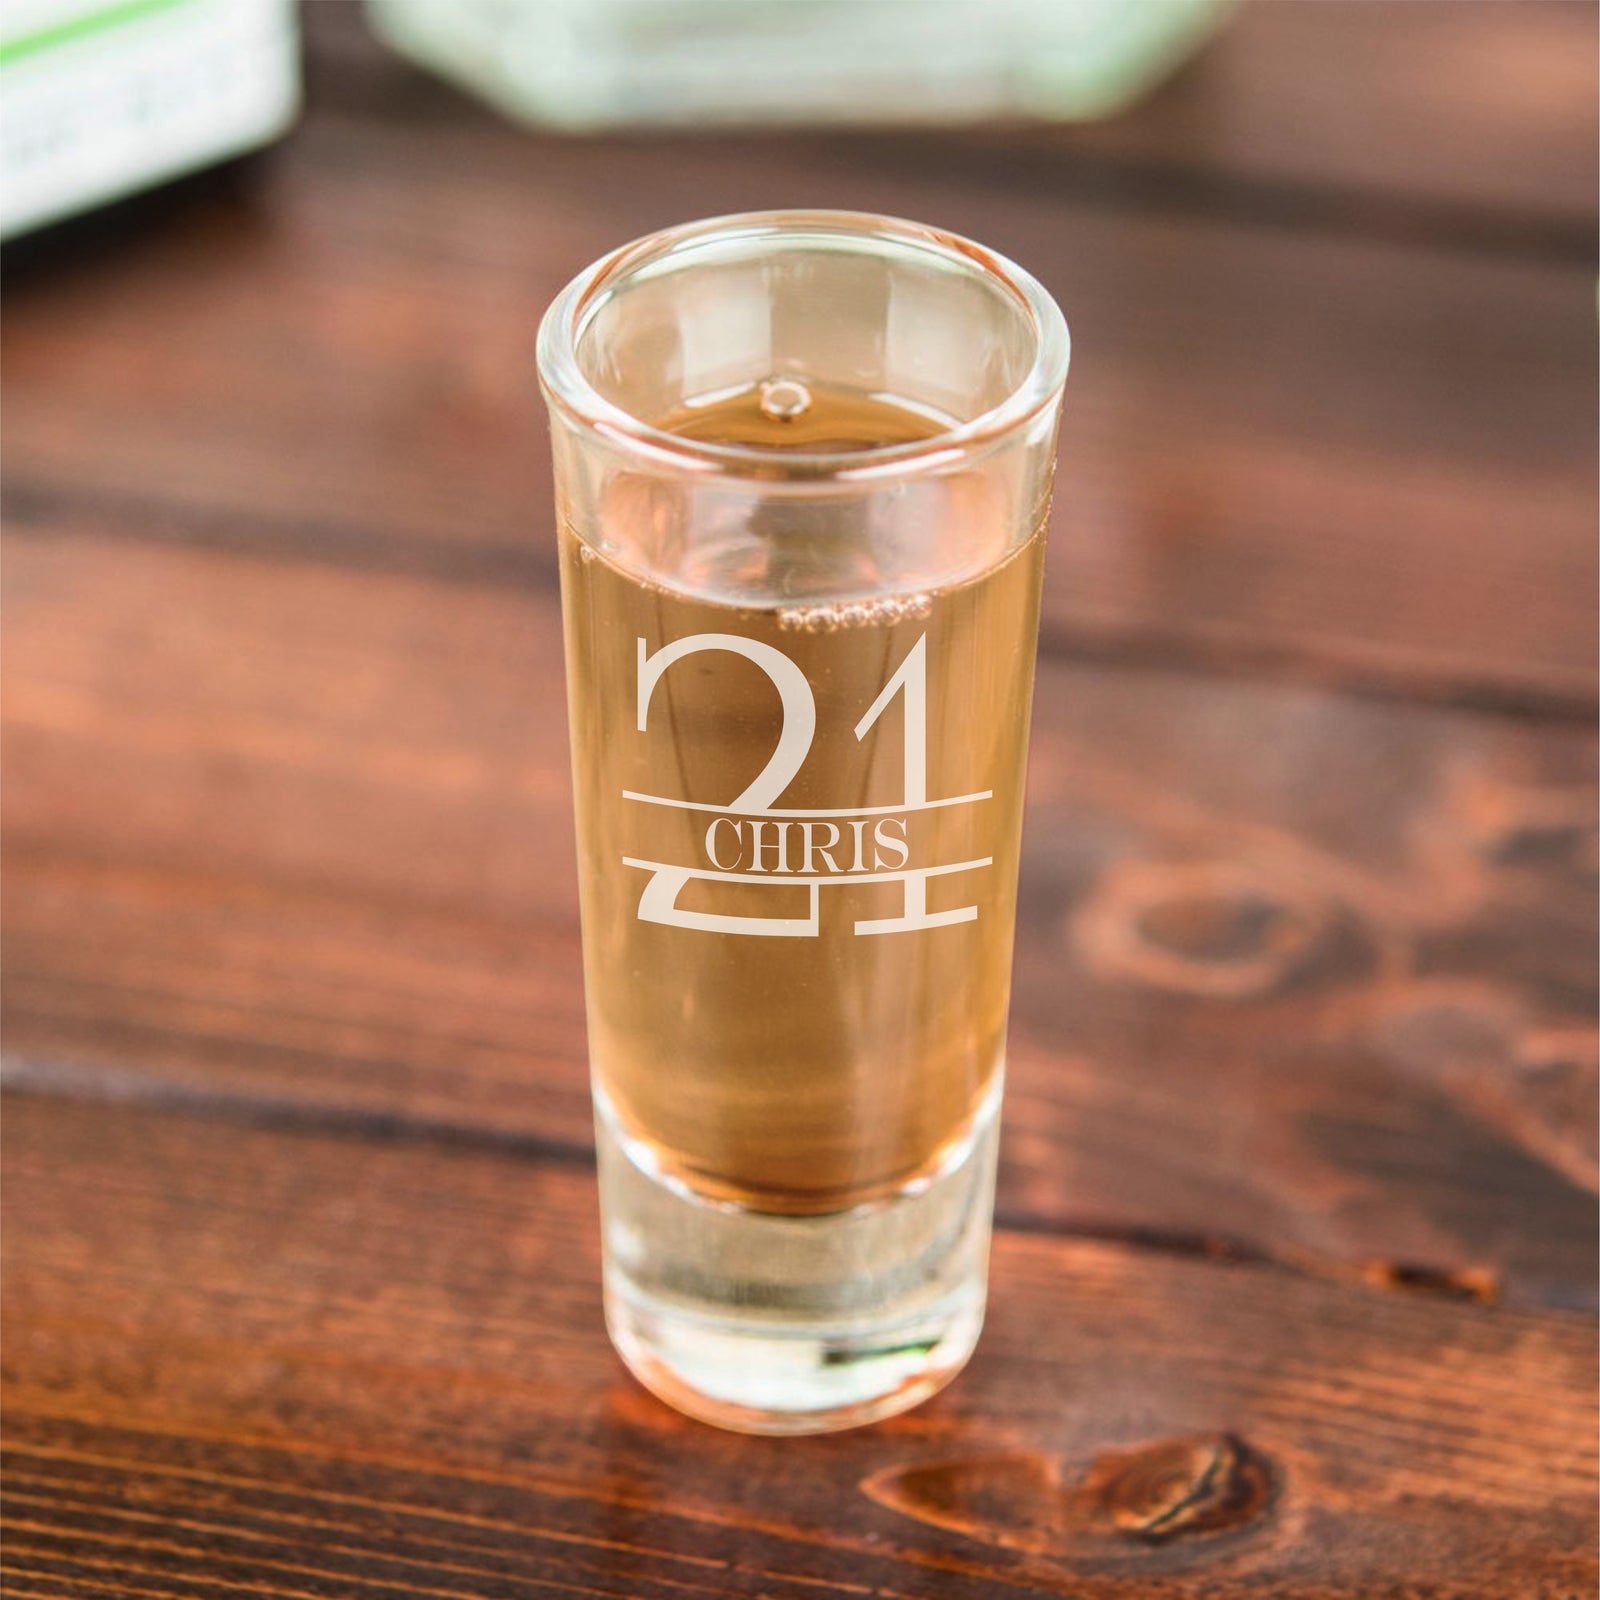 Personalized Shot Glasses: A Unique Way to Raise a Toast